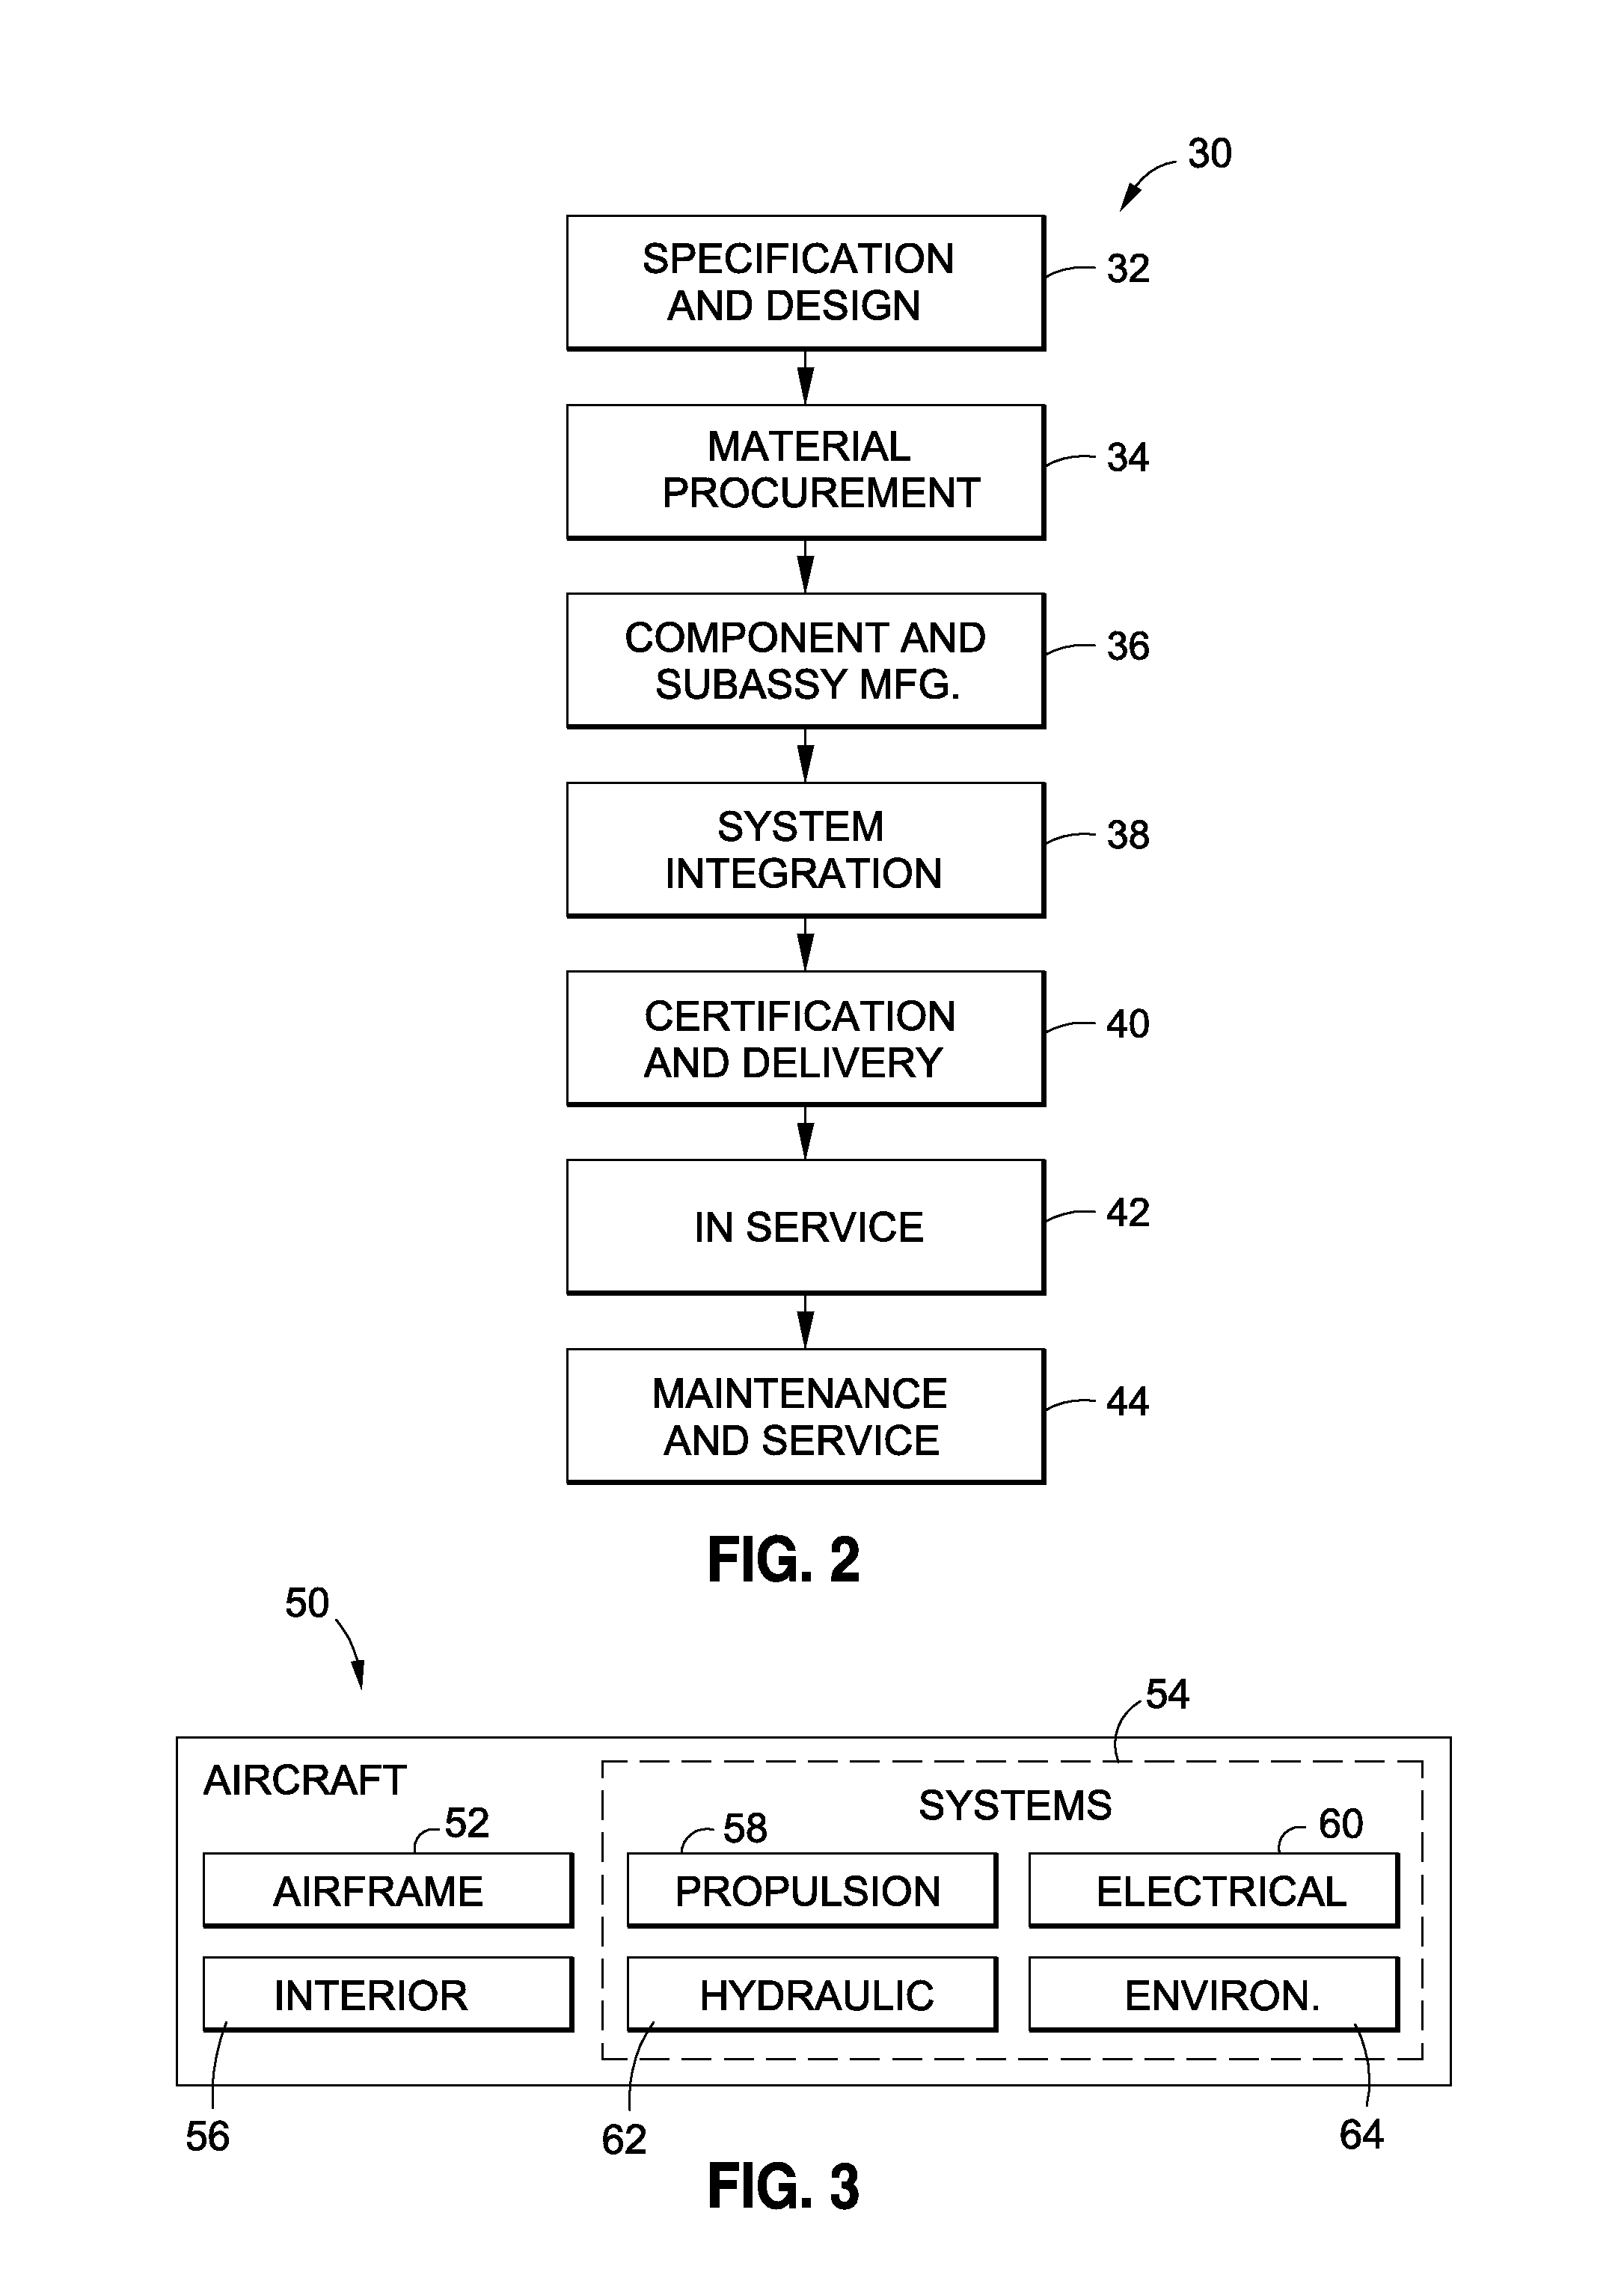 Systems and methods for environmental testing and evaluation of non-destructive inspection sensors